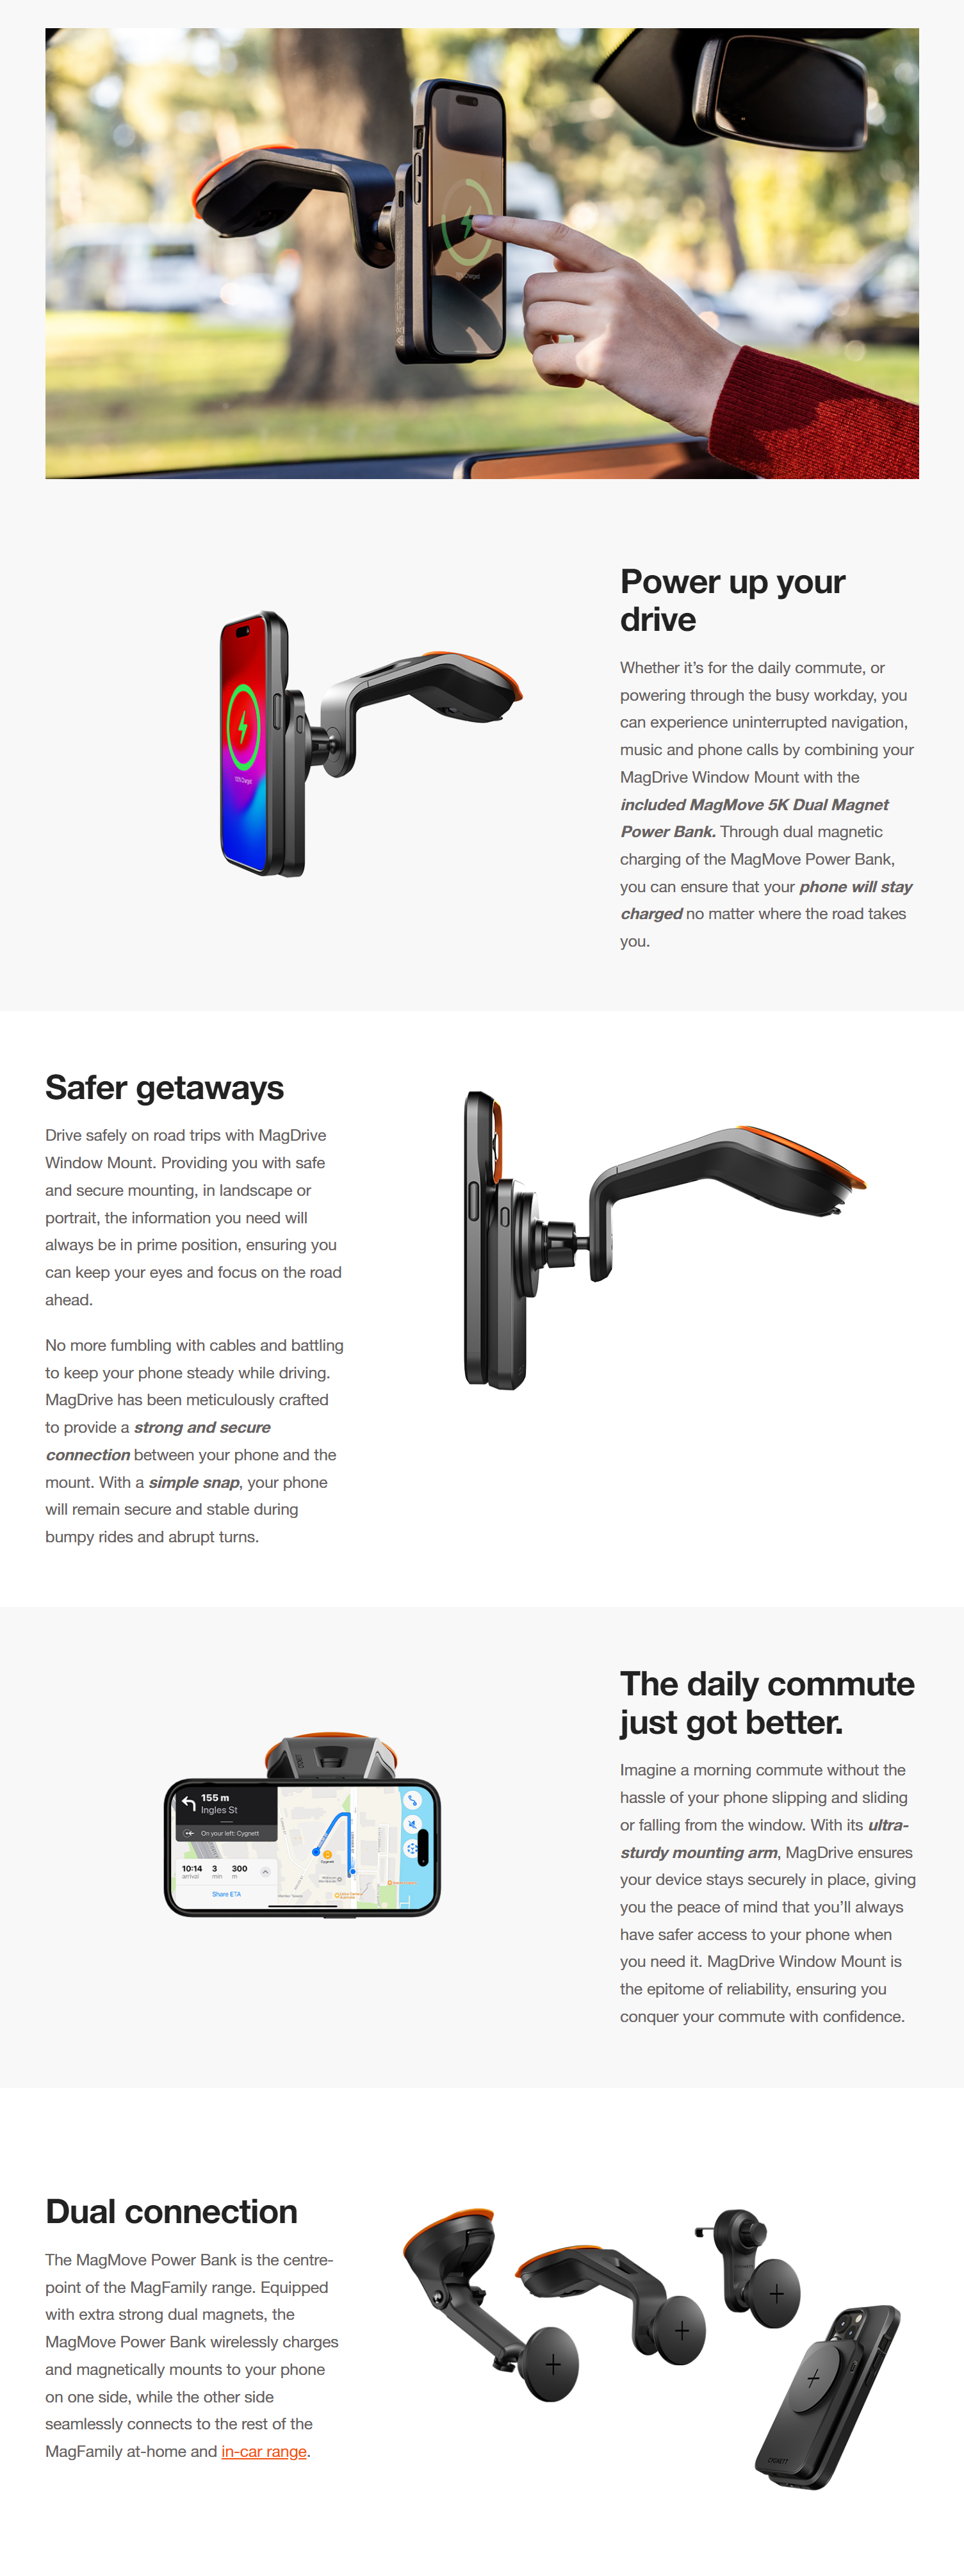 Mobile-Phone-Accessories-Cygnett-MagDrive-Magnetic-Car-Window-Mount-Fixed-Arm-with-5K-mAh-Dual-Magnet-Power-Bank-10